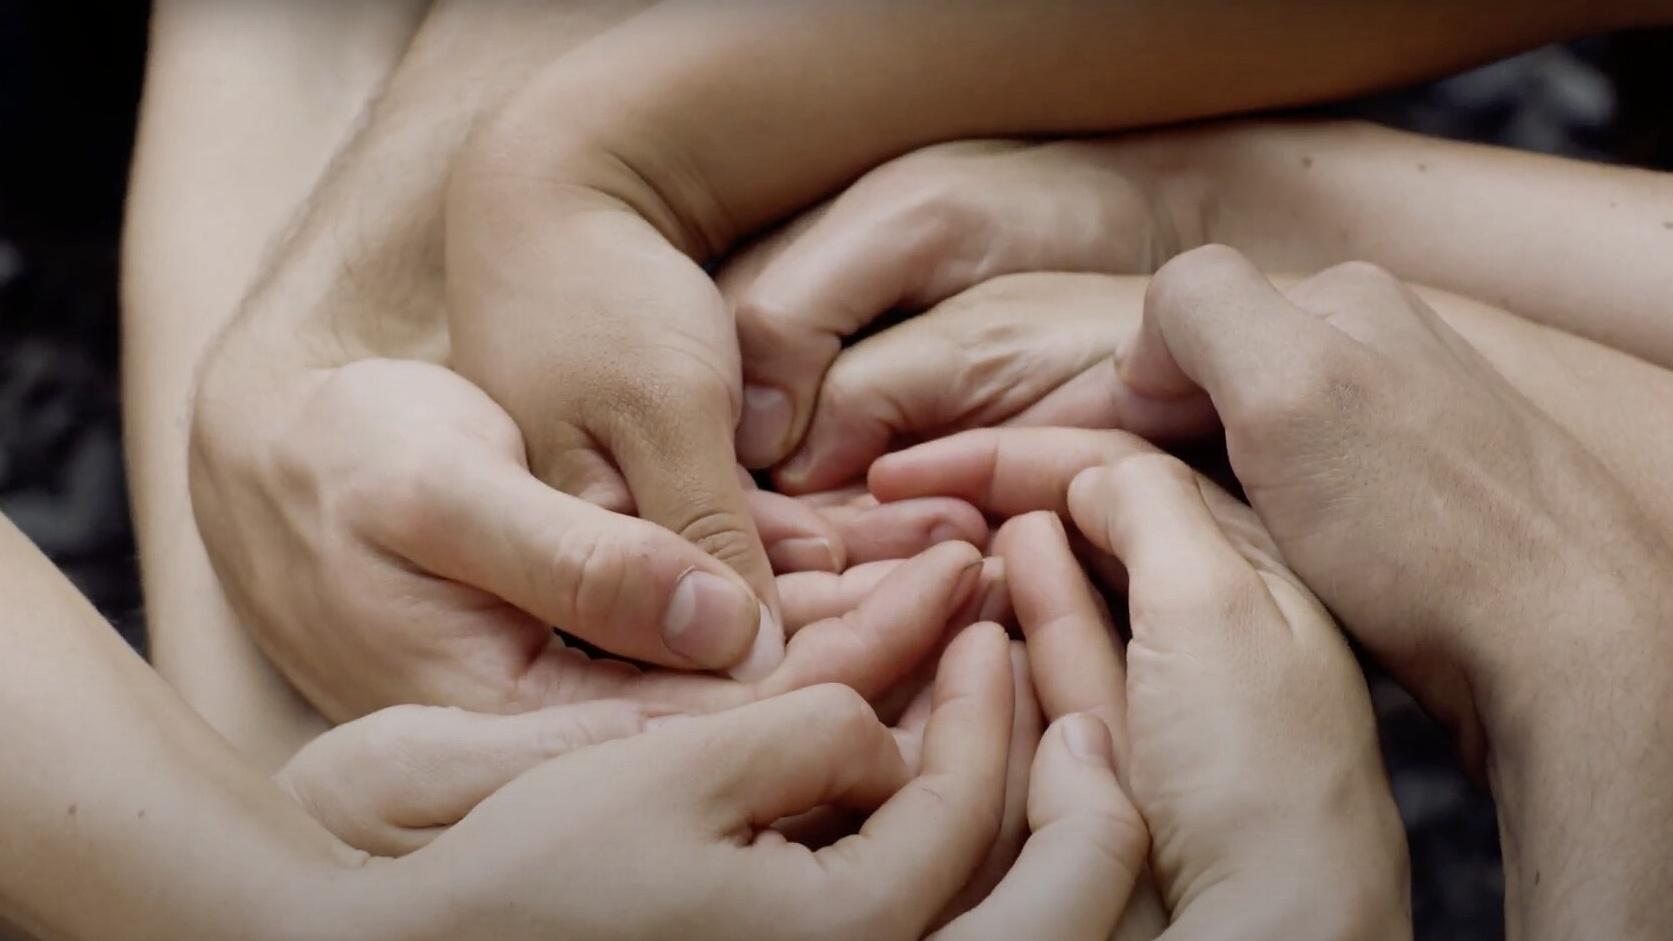 photo of a group of hands